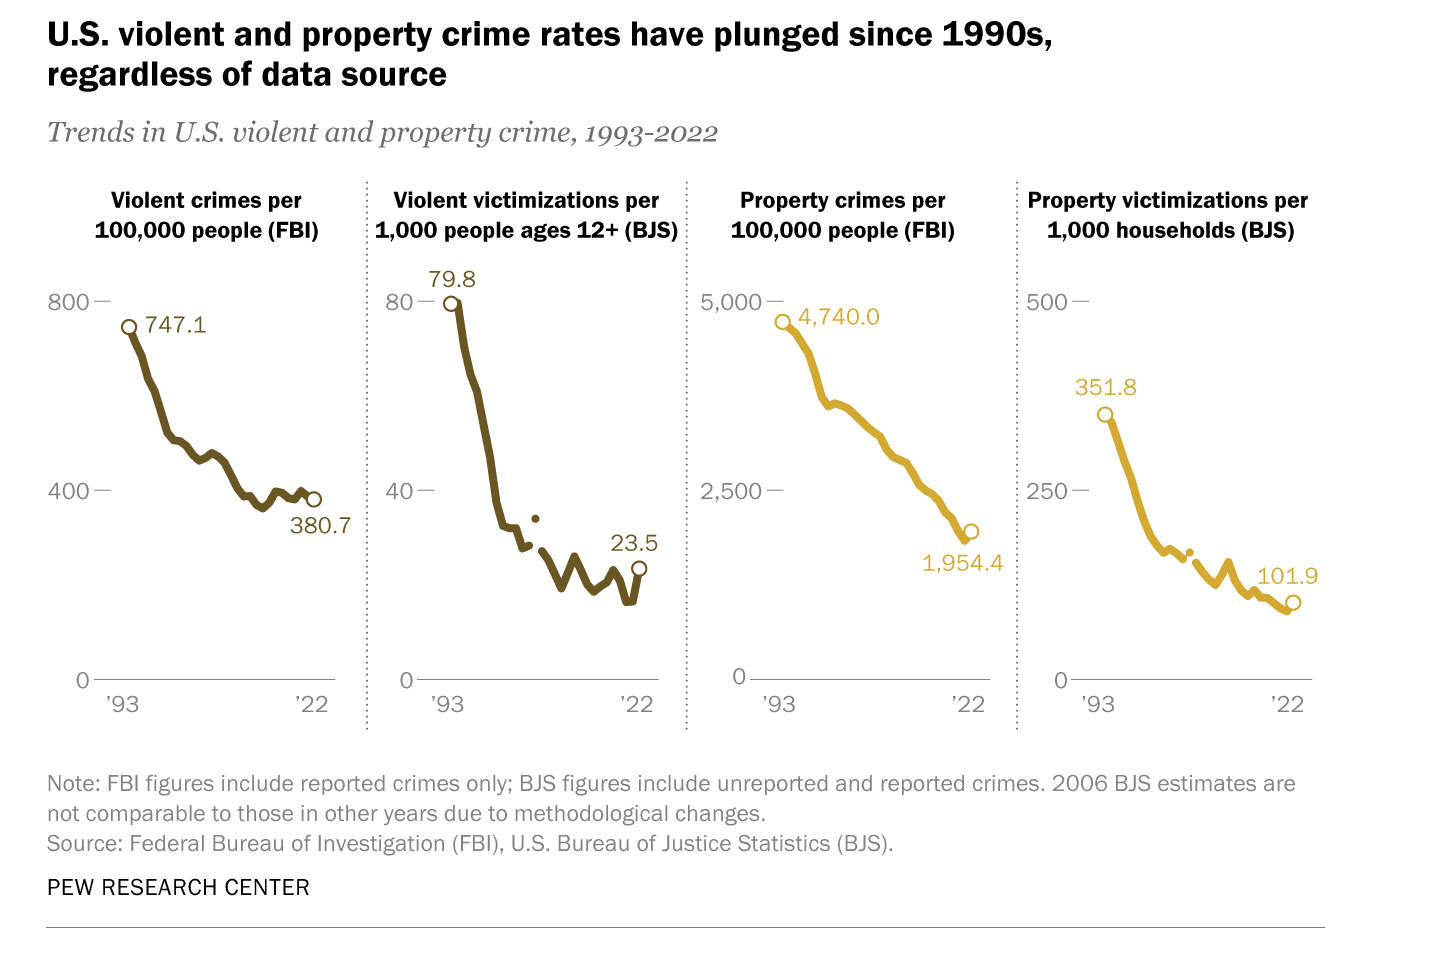 pew research poll showing how much crime has plummeted since 1993